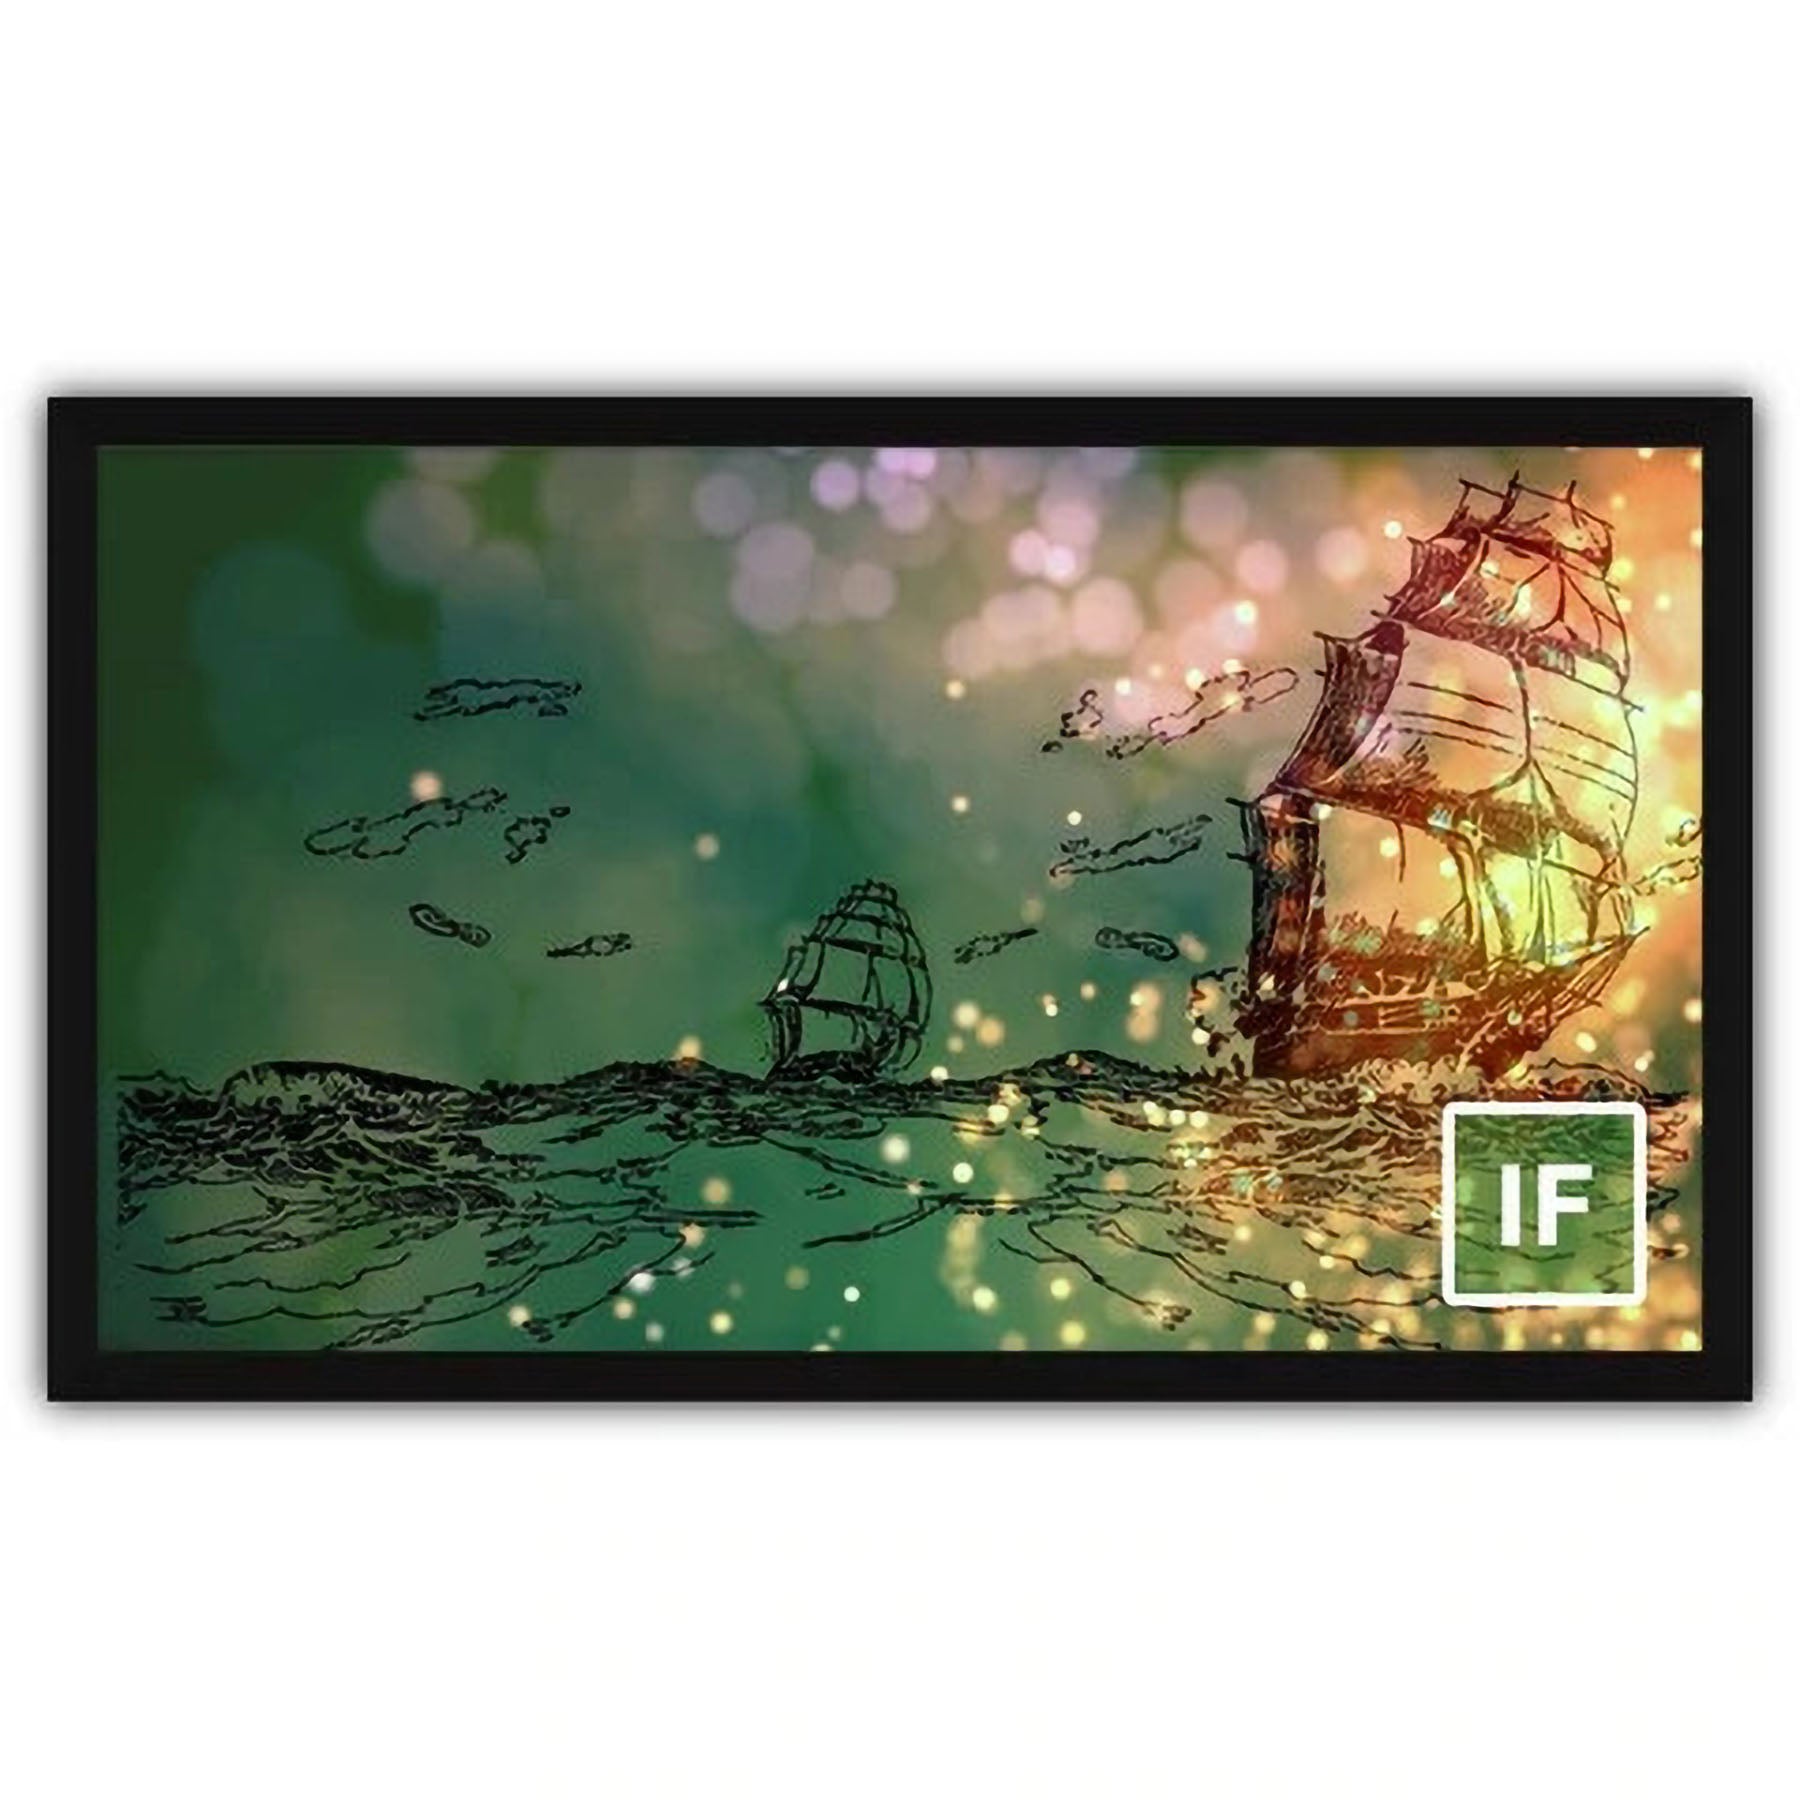 Severtson Screens Impression Series 16:9 106-inch Fixed Frame Projection Screen